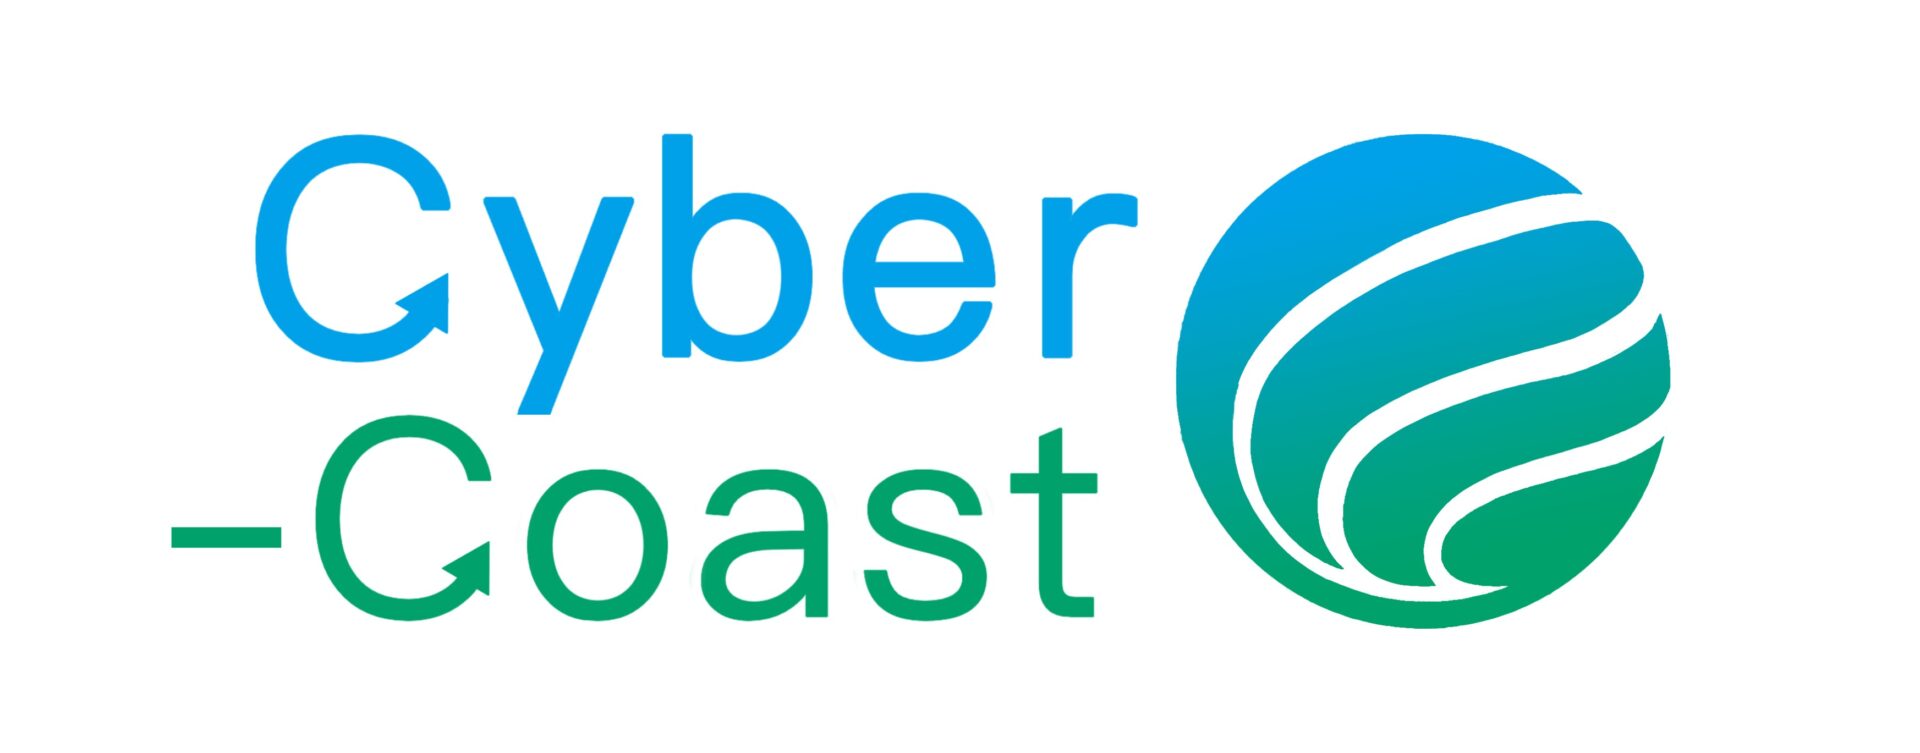 FEC CYBER-COAST Working Group Established to Address Ecosystem Resilience Amid Global Changes